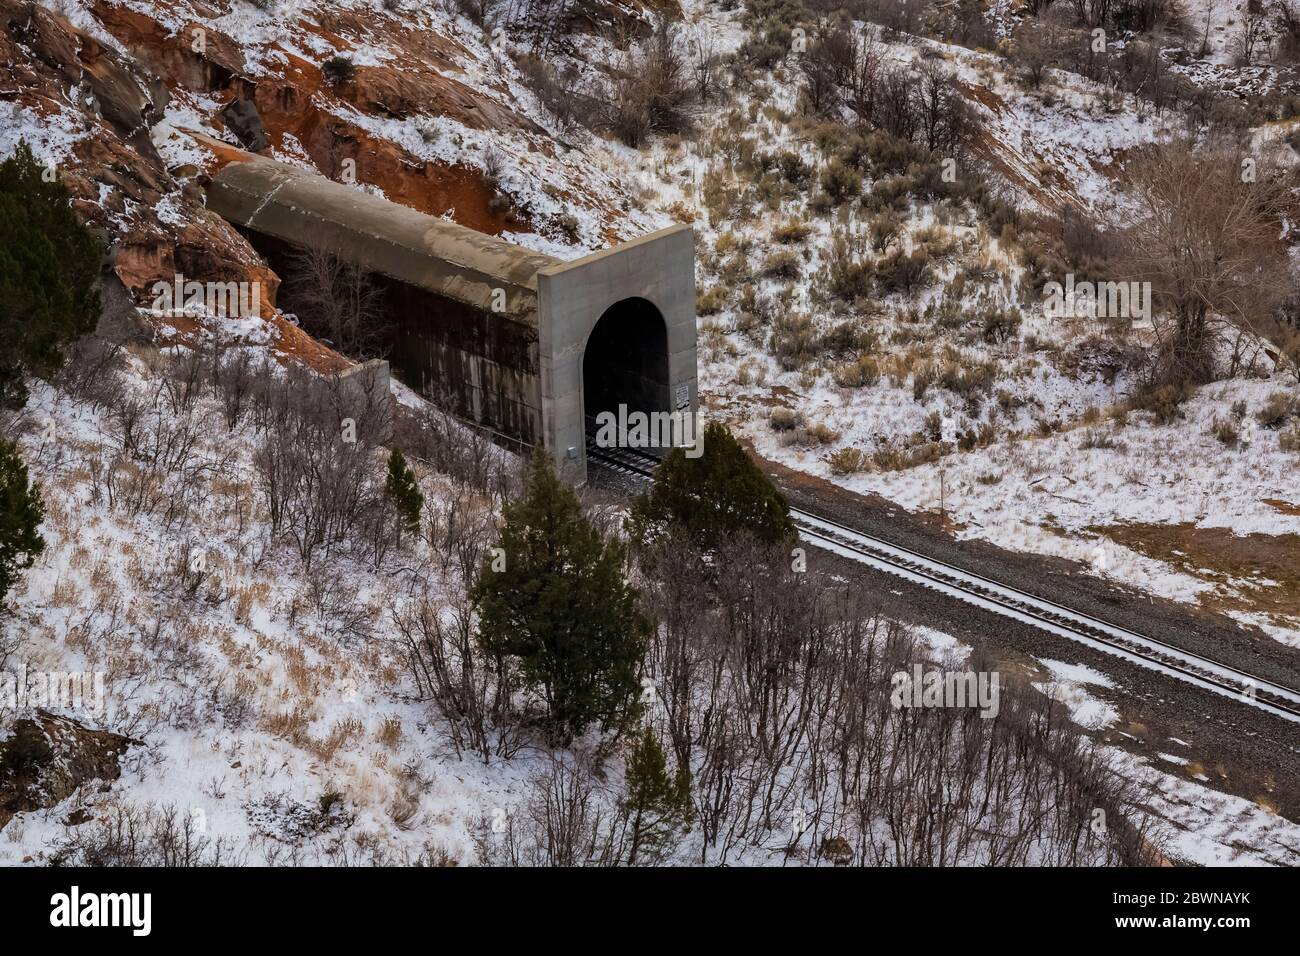 West entrance to Thistle Tunnel in Spanish Fork Canyon in the Wasatch Mountains near Price, Utah, USA [No property release; available for editorial li Stock Photo